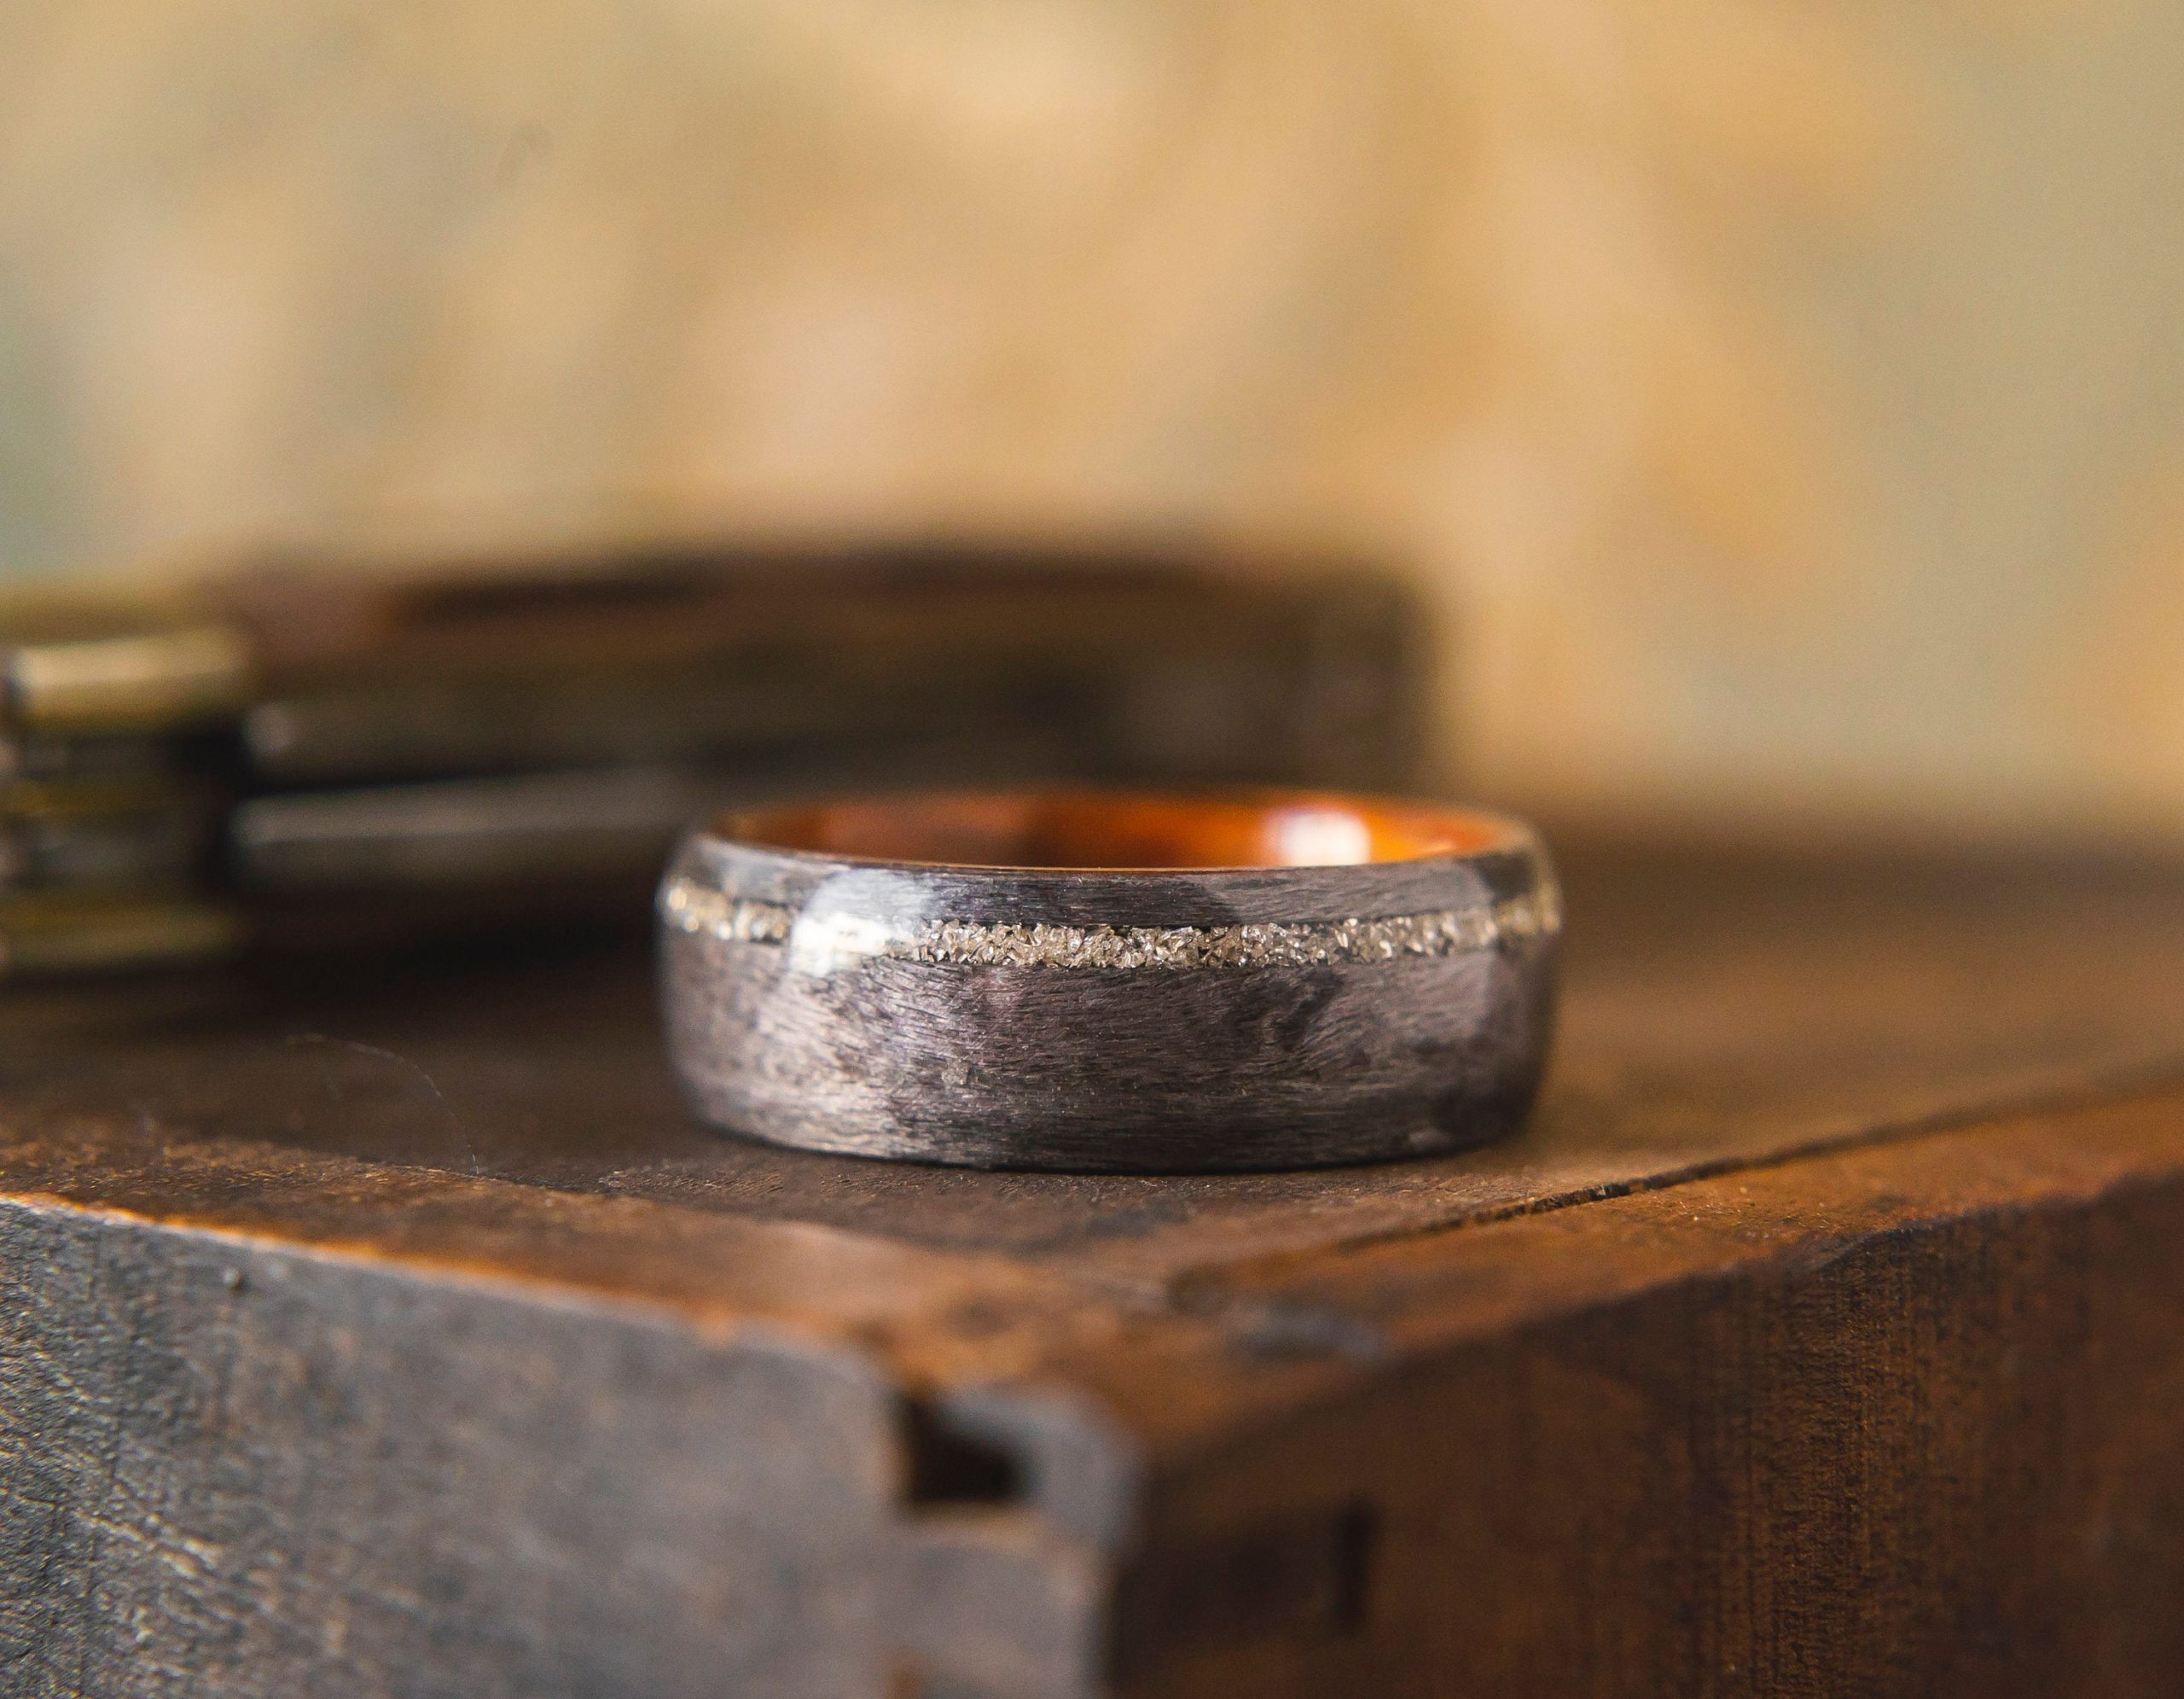 Lita Sea Glass Jewelry - Did you know that we make mens rings too? Check  out this fabulous wedding ring set we made for a wonderful couple! They  wanted rings that would